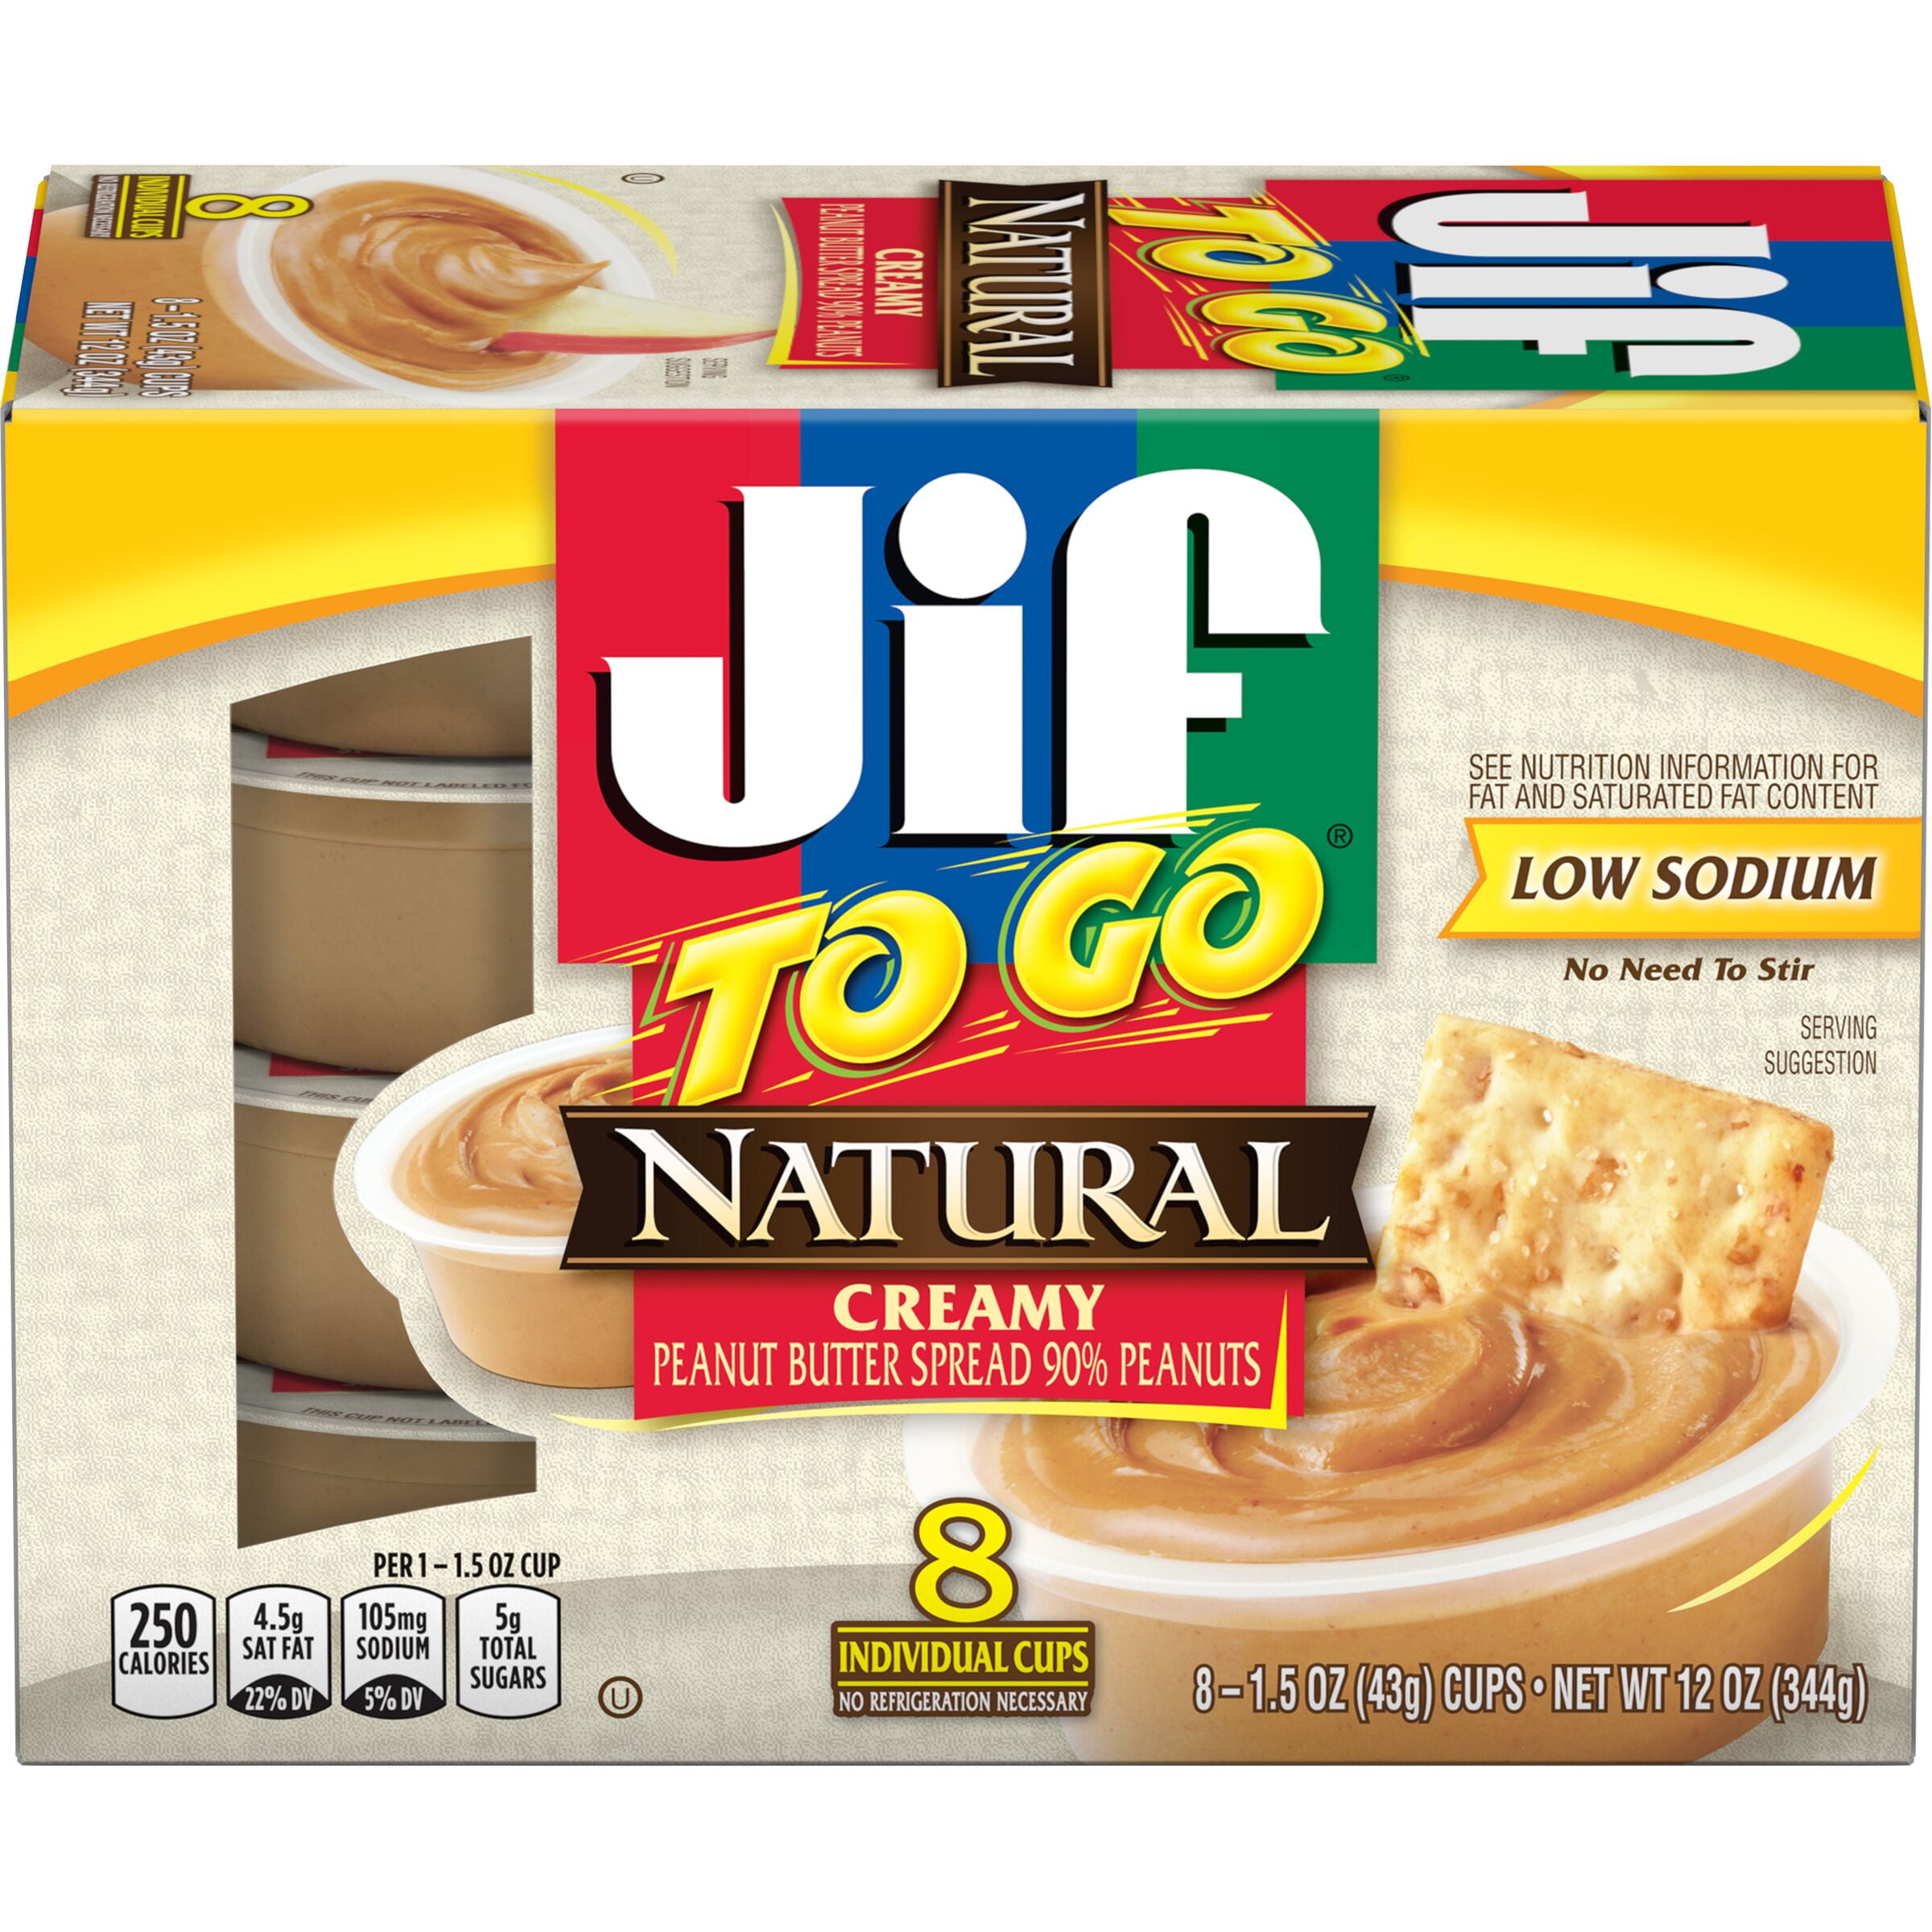 Jif To Go Natural Creamy Peanut Butter Spread, 8- 1.5 oz Cups